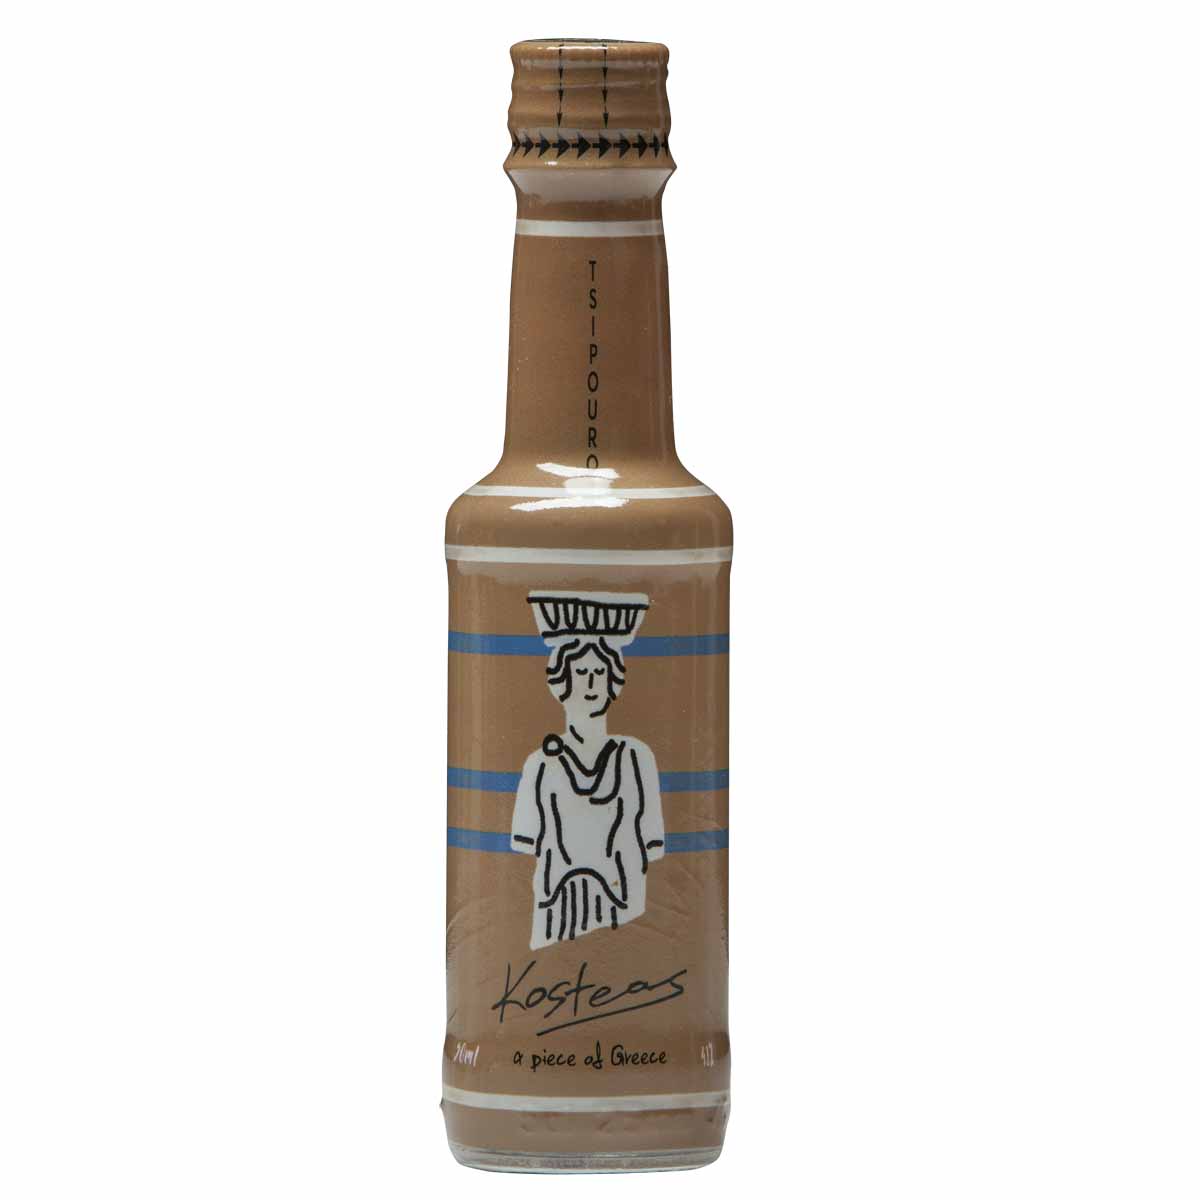 Collectible Miniature Tsipouro from Kalamata without anise, "Caryatid", 50ml, 41%vol, "Kosteas"